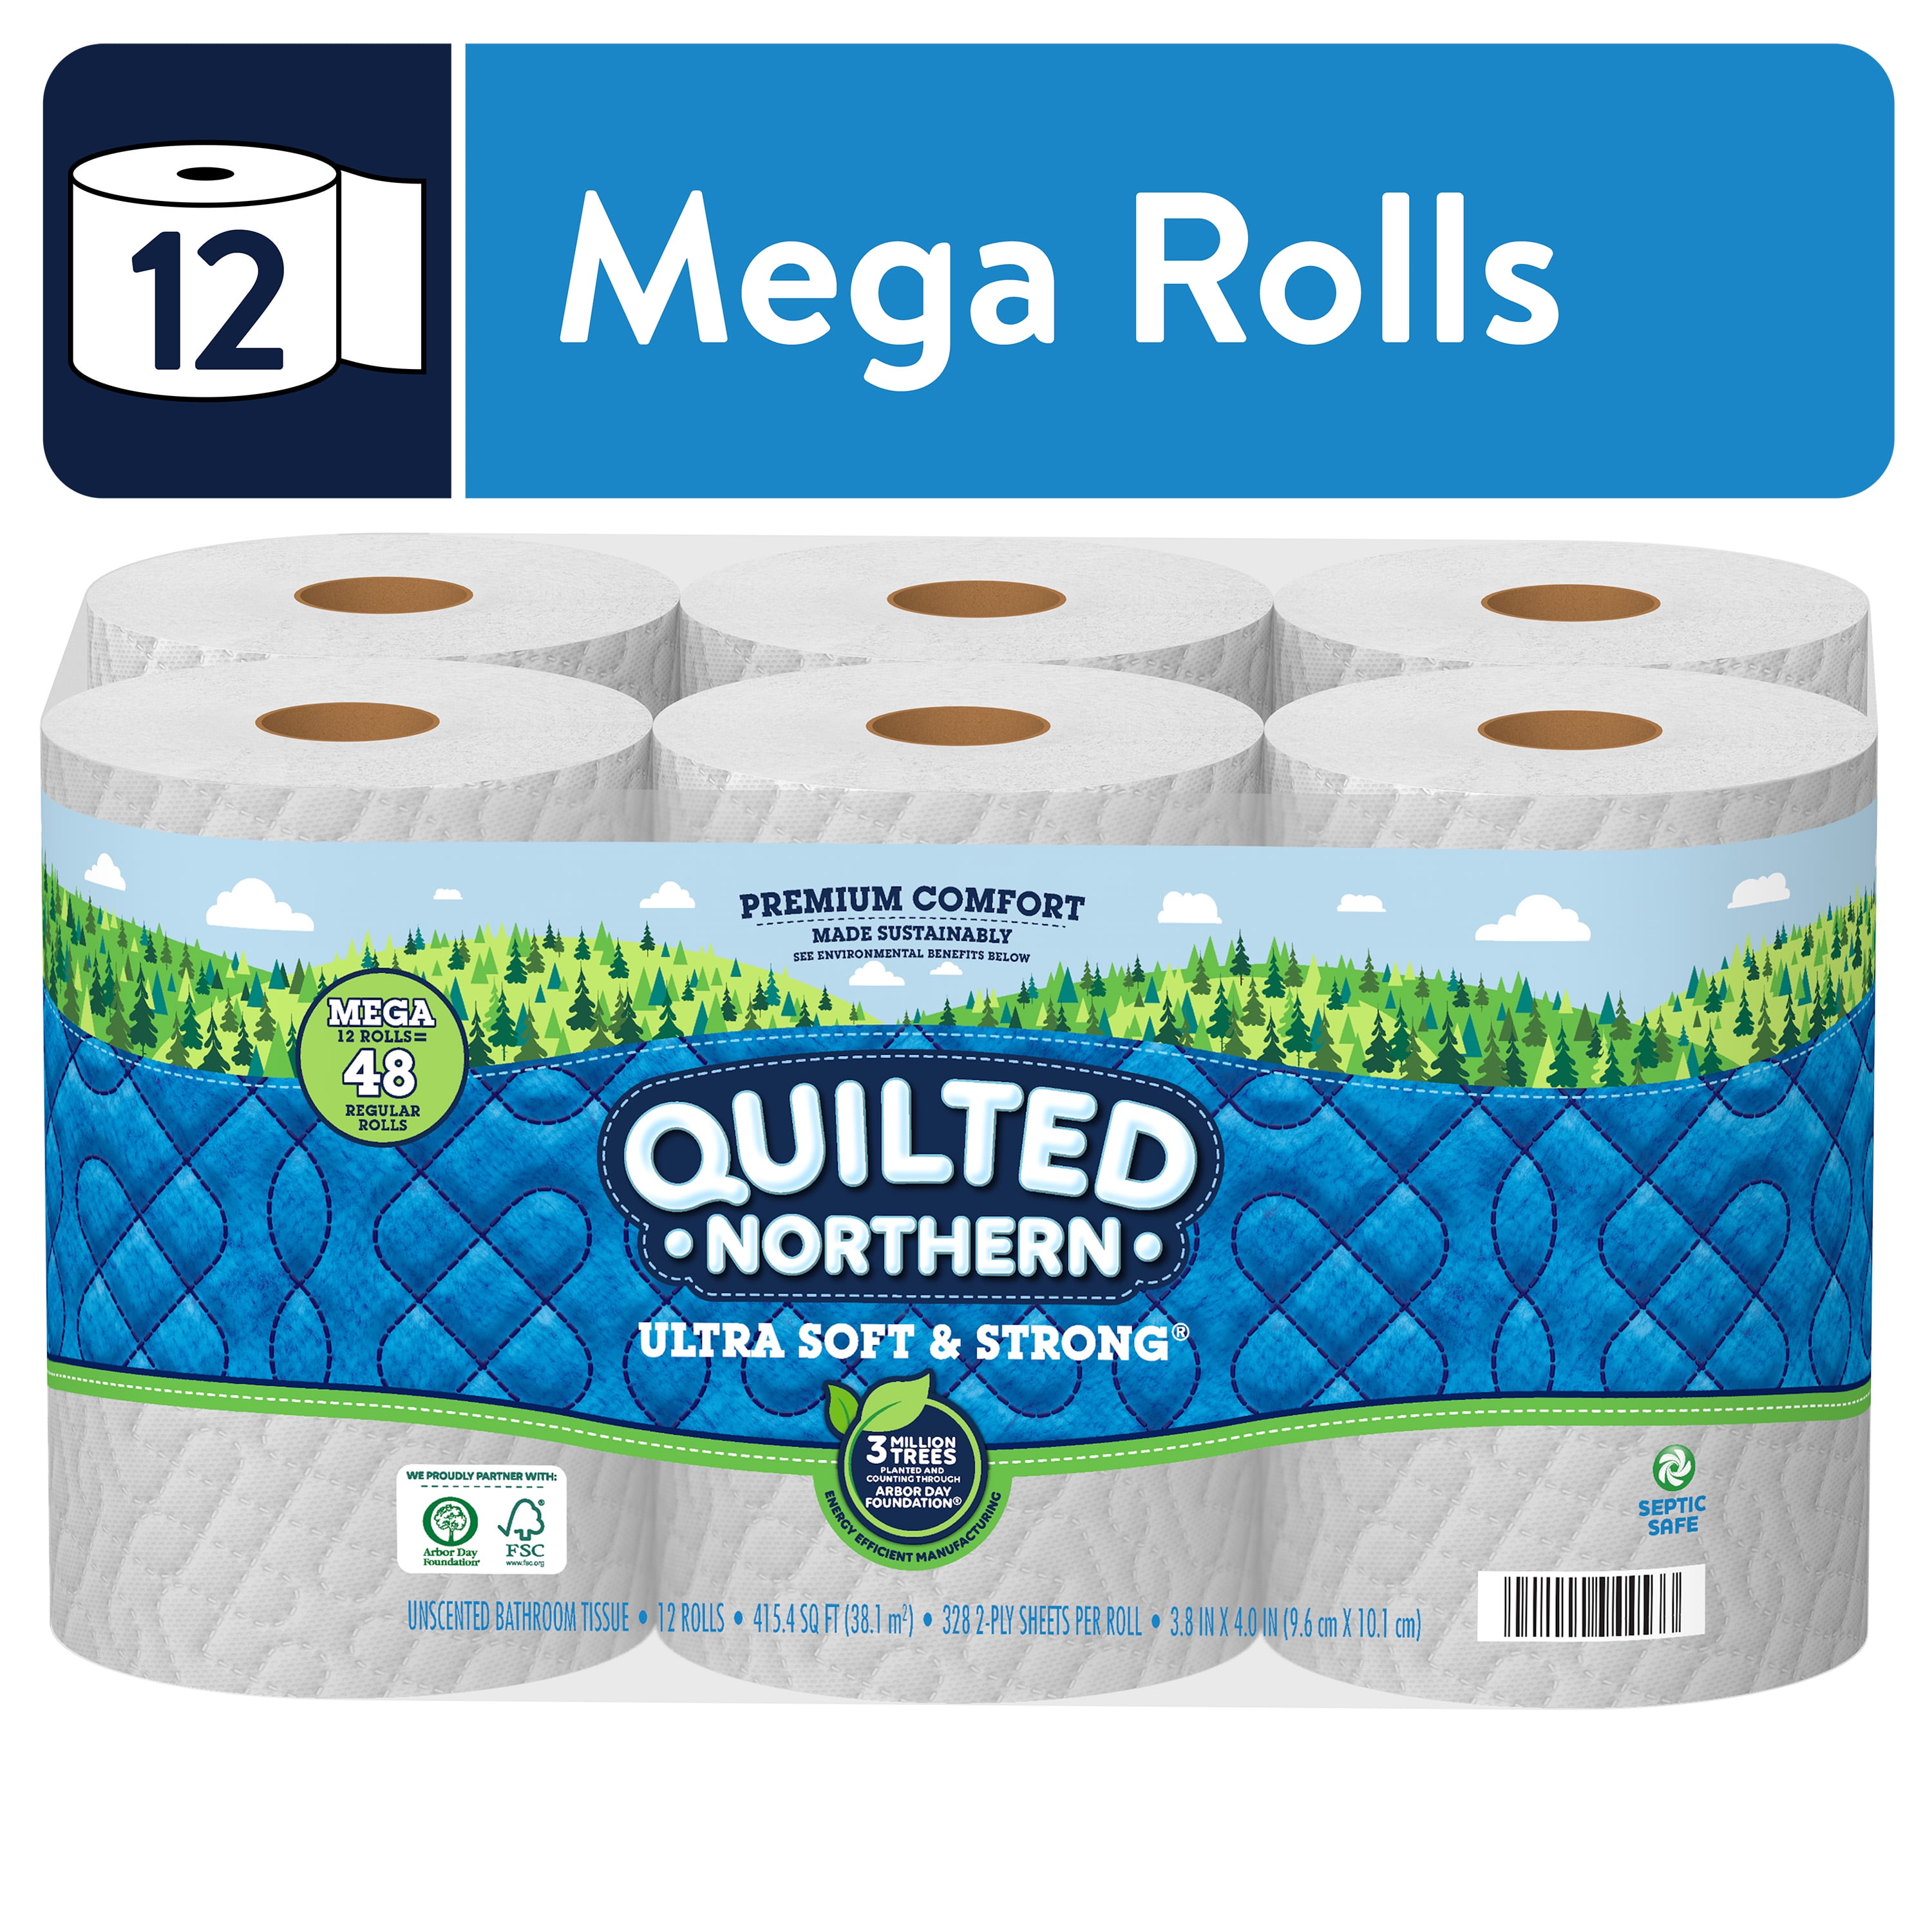 Quilted Northern Ultra Soft & Strong Toilet Paper